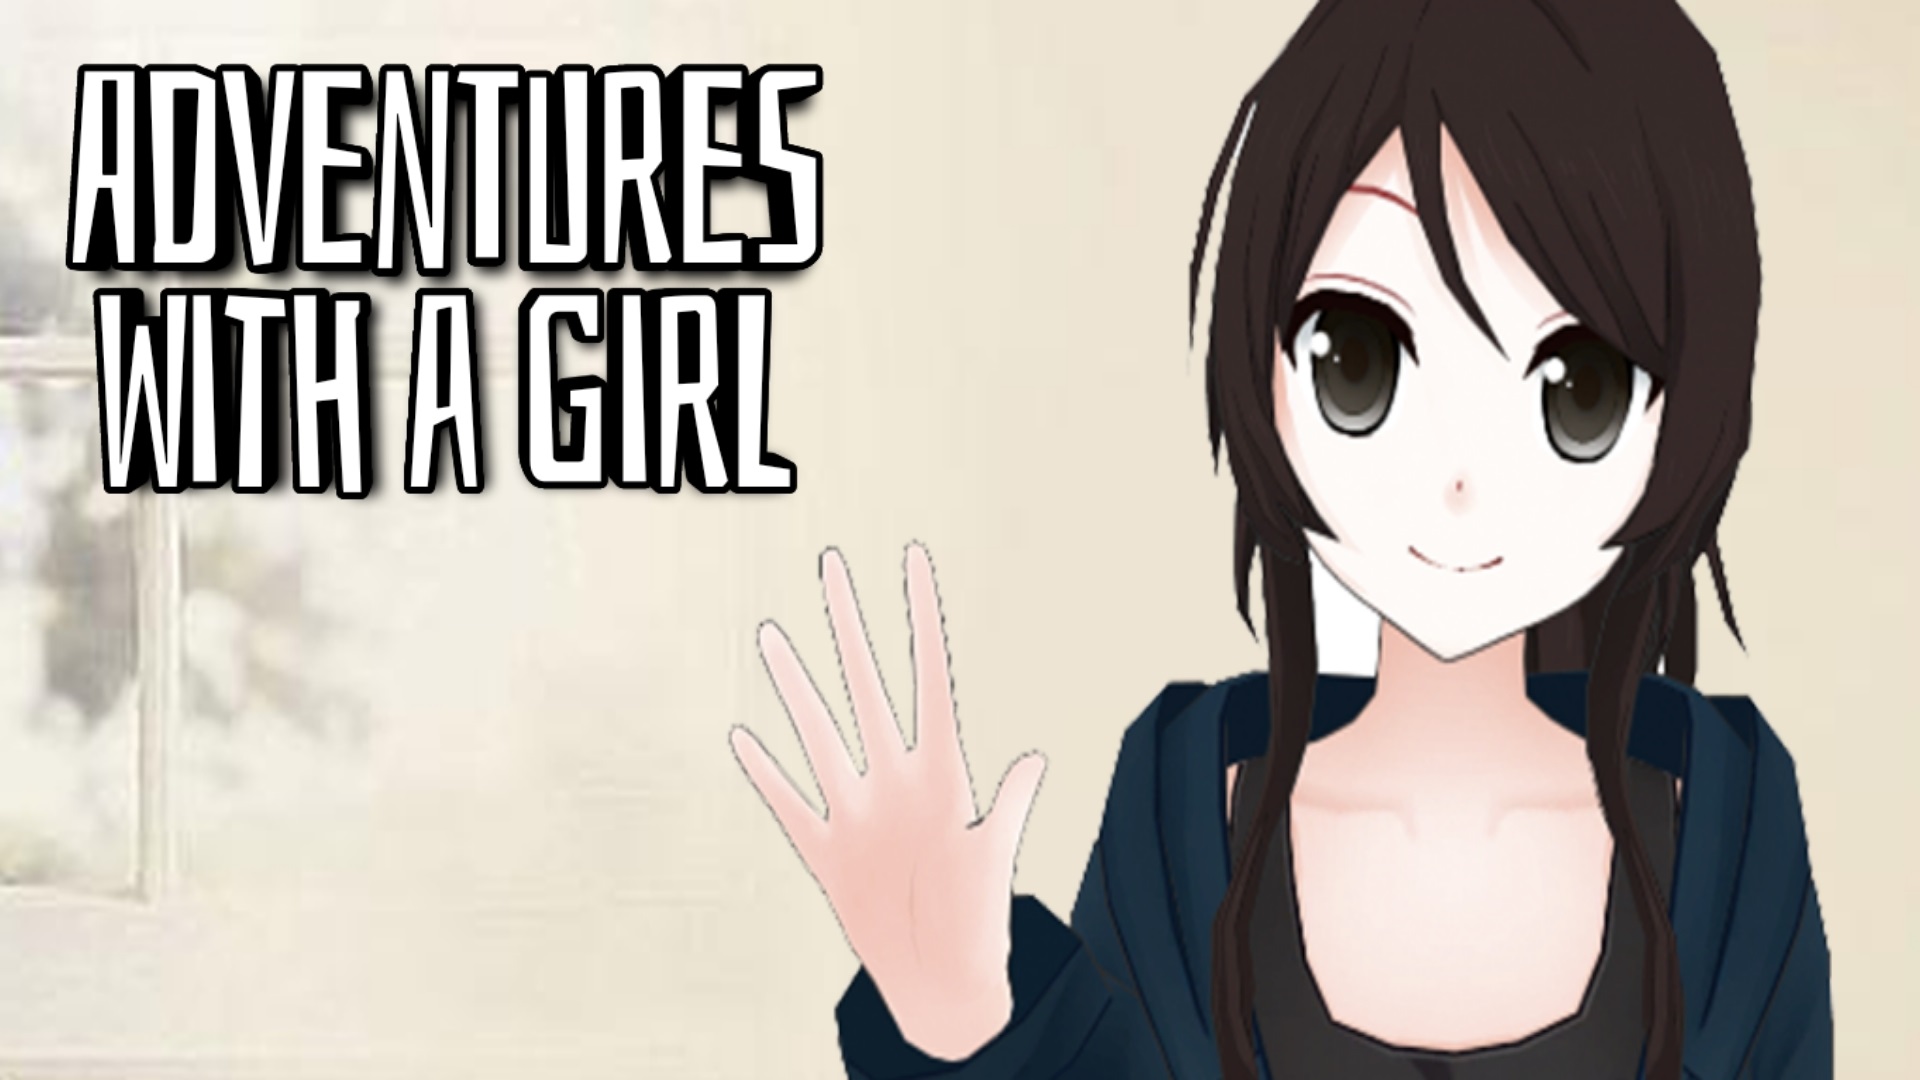 Adventures With a Girl